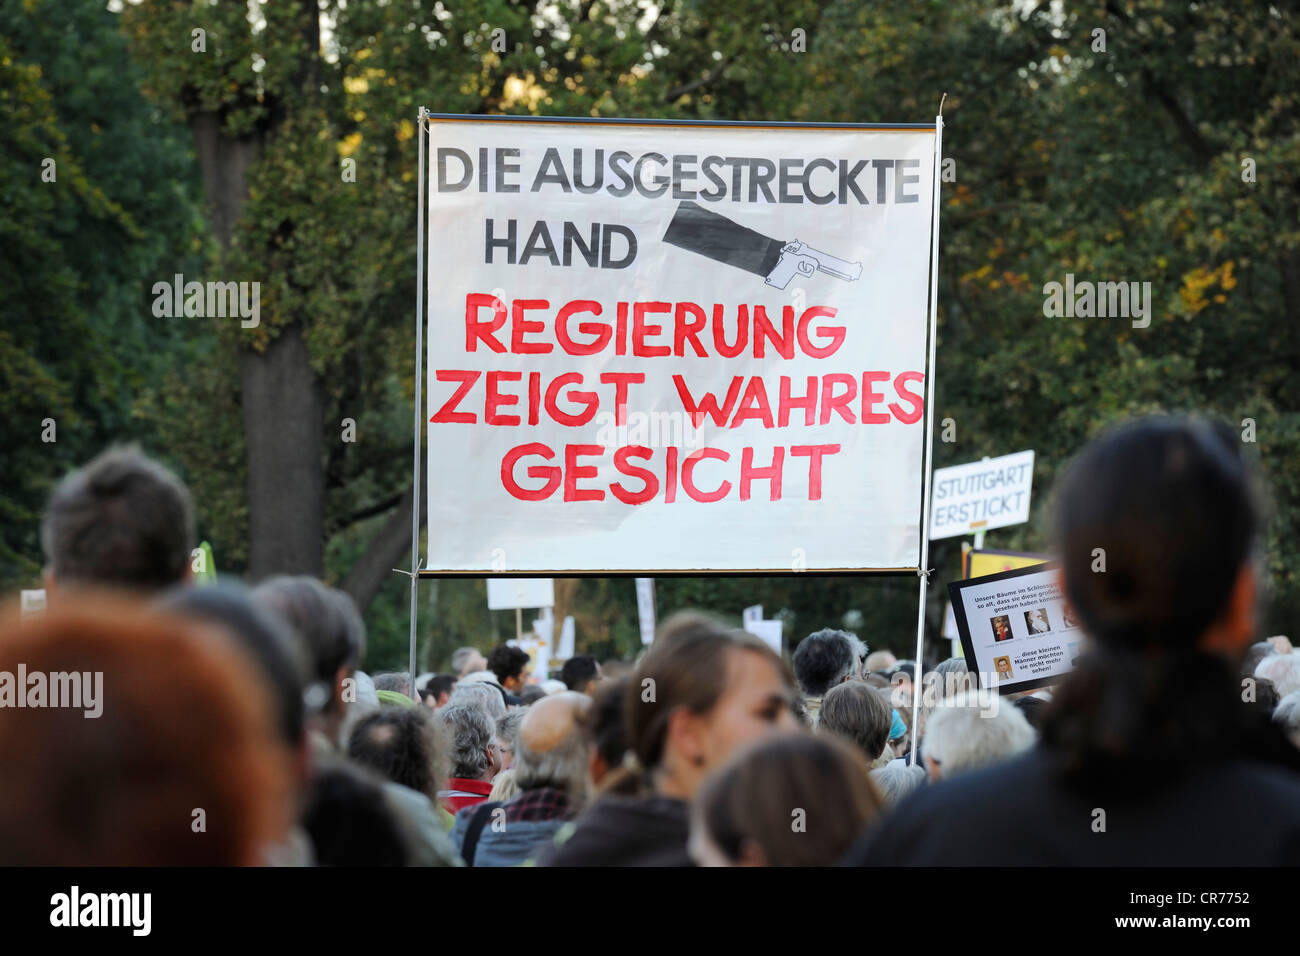 Protesters carrying a banner with 'Regierung zeigt wahres Gesicht', German for 'Government shows its true colours' in a Stock Photo